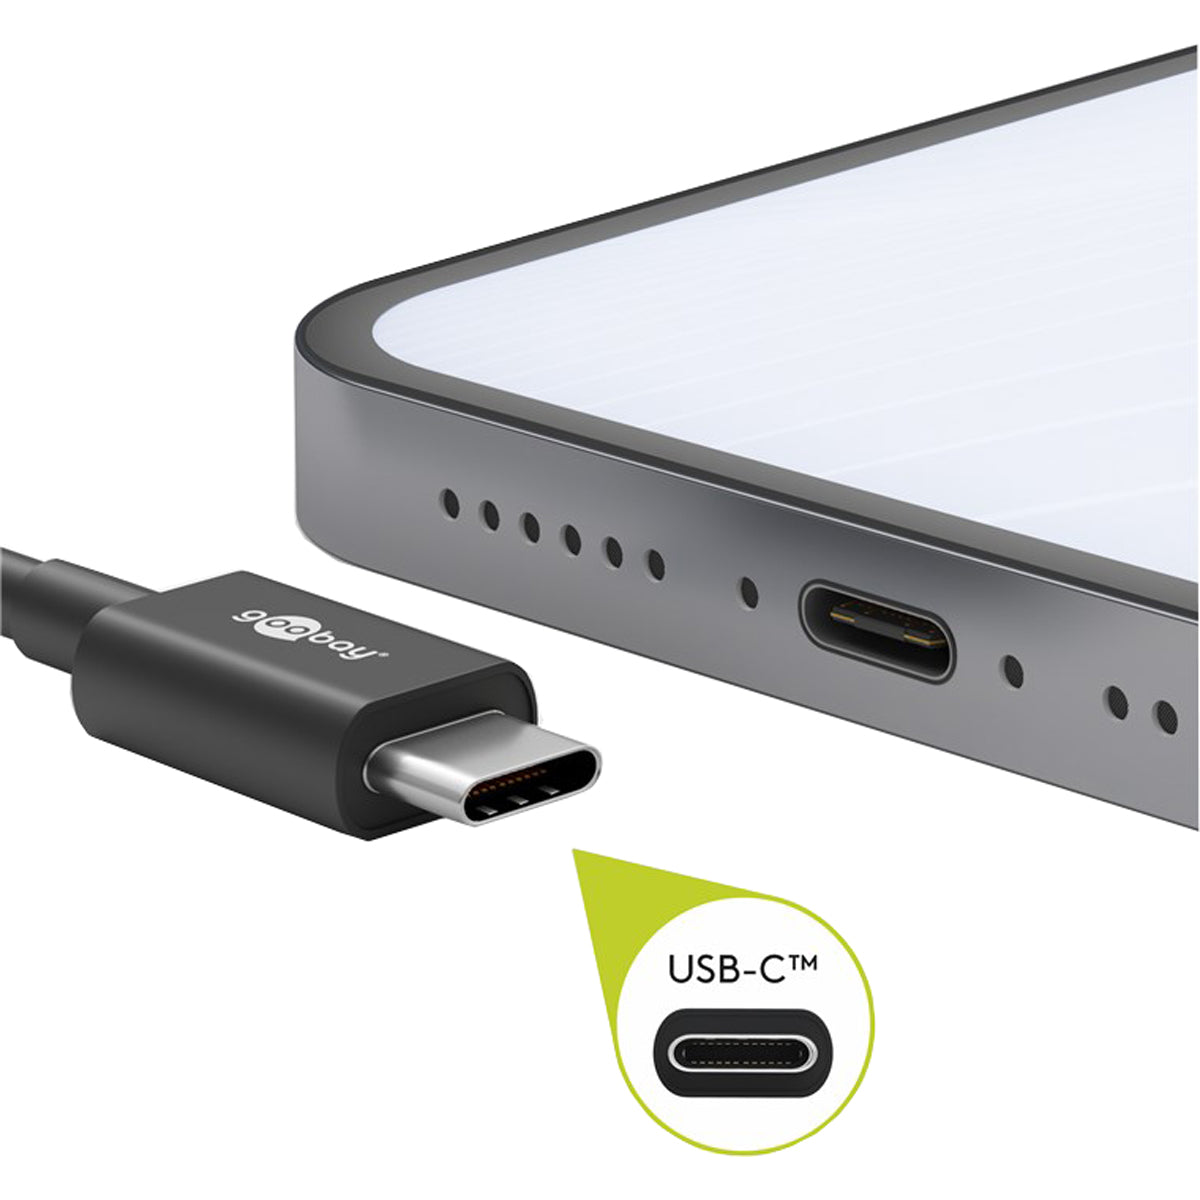 Goobay USB-C Charging and Sync 1M Cable - Black.